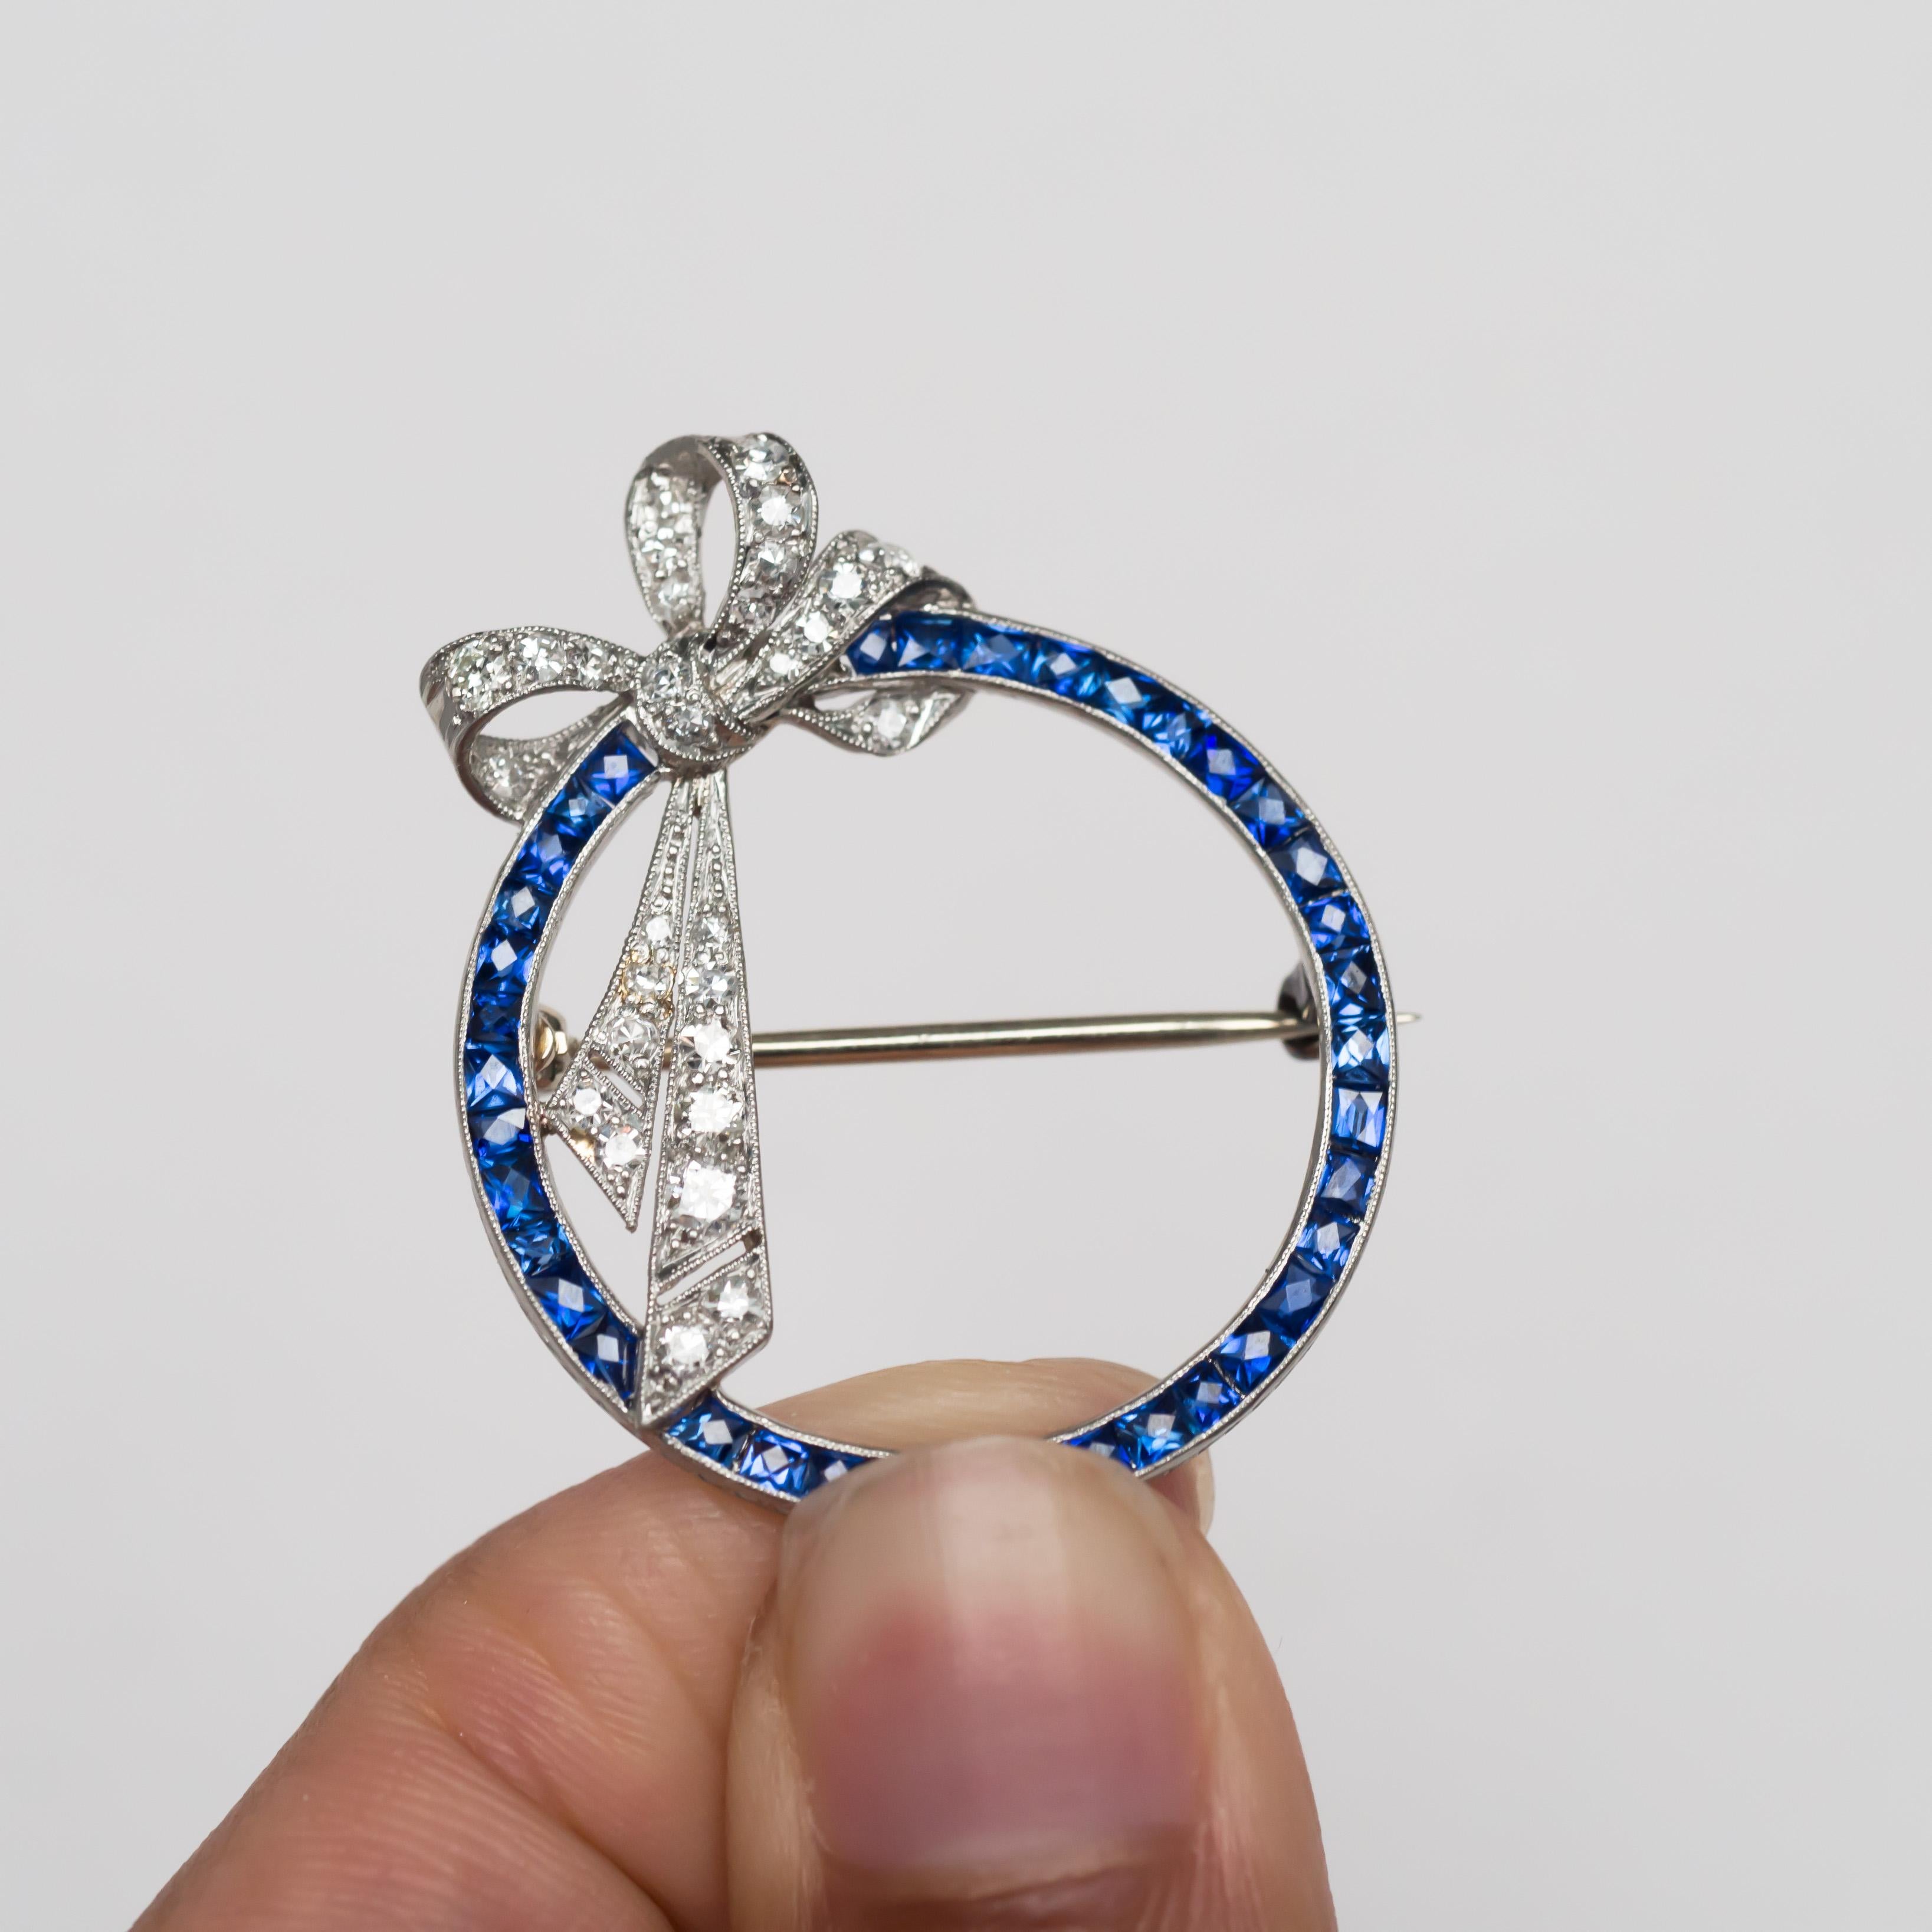 Metal Type: Platinum  [Hallmarked, and Tested]
Weight: 5.3 grams

Sapphire Details:
Weight: 1.50 carat, total weight
Cut: French Cut
Color: Blue
Clarity: VS


Diamond Details:
Weight: .40 carat, total weight
Cut: Old Single cut
Color: E-F
Clarity: